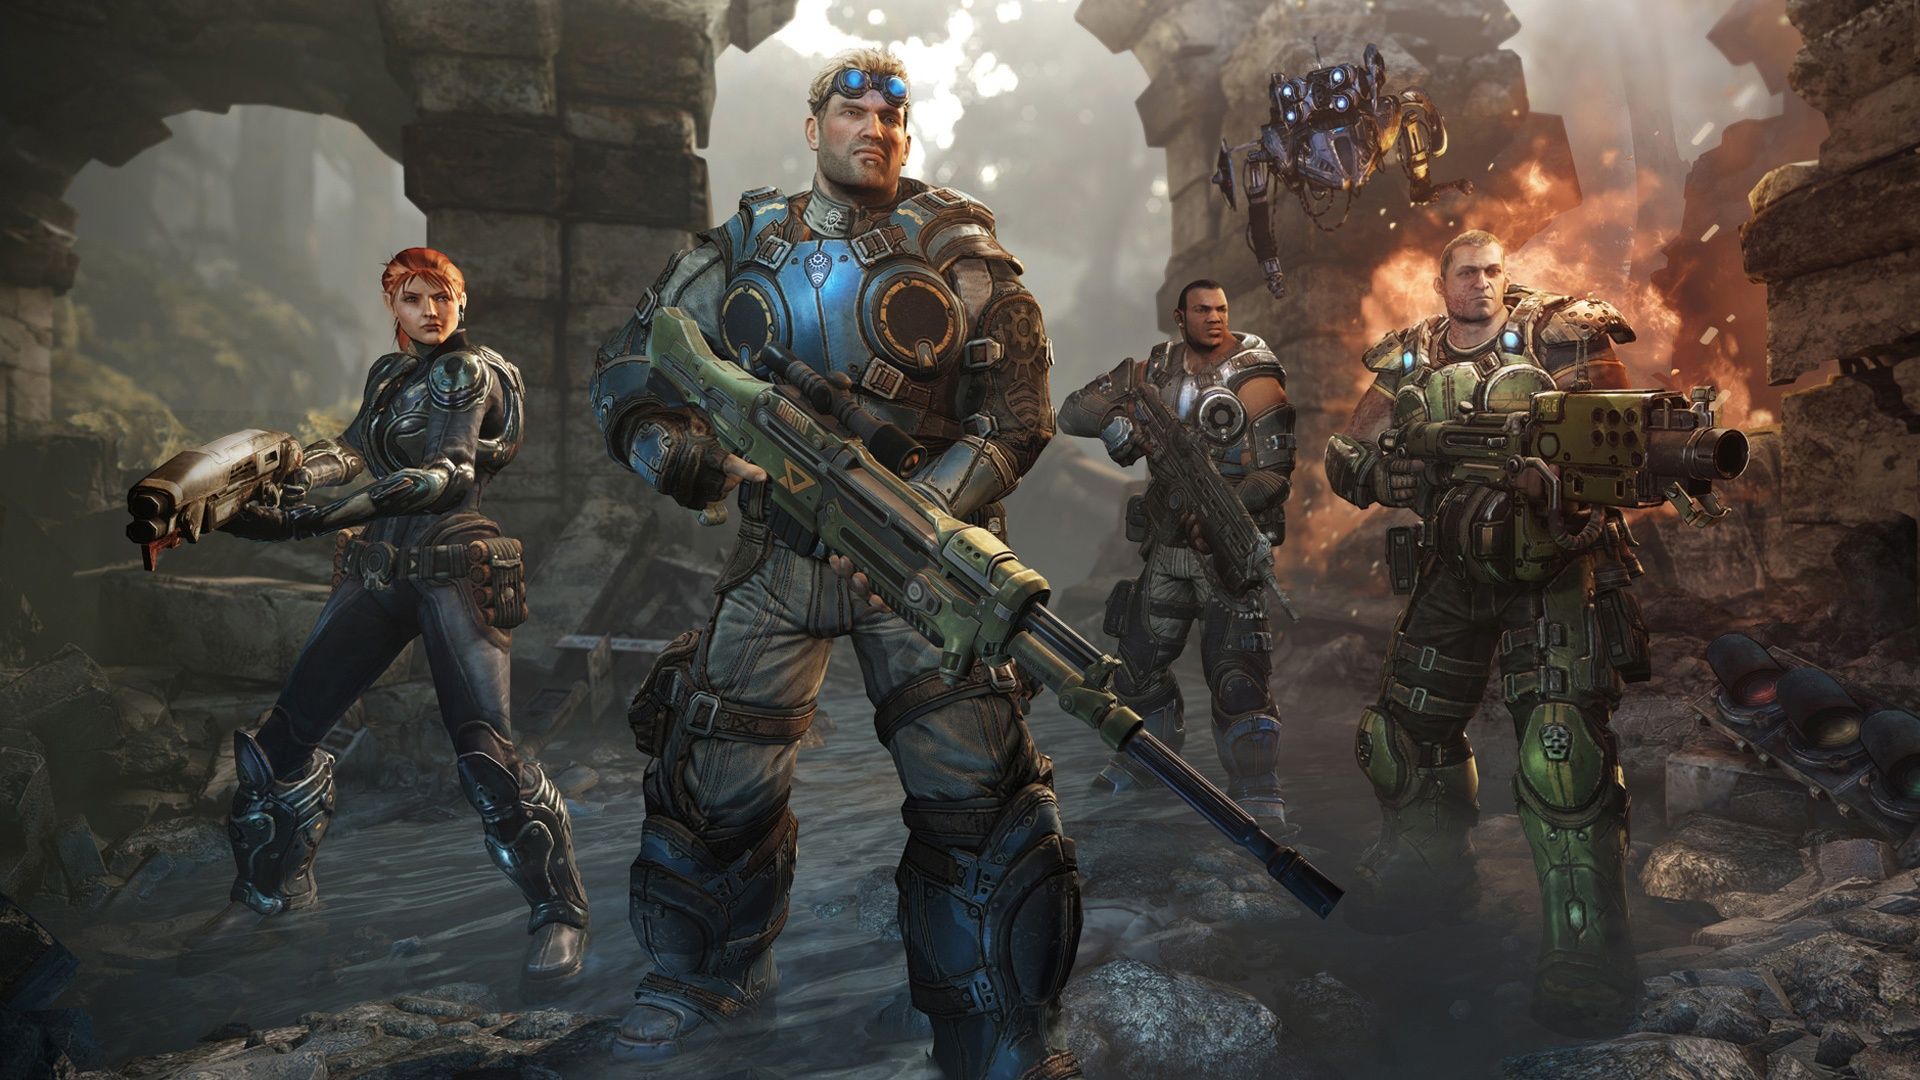 Gears of War Judgment Game Wallpaper in jpg format for free download